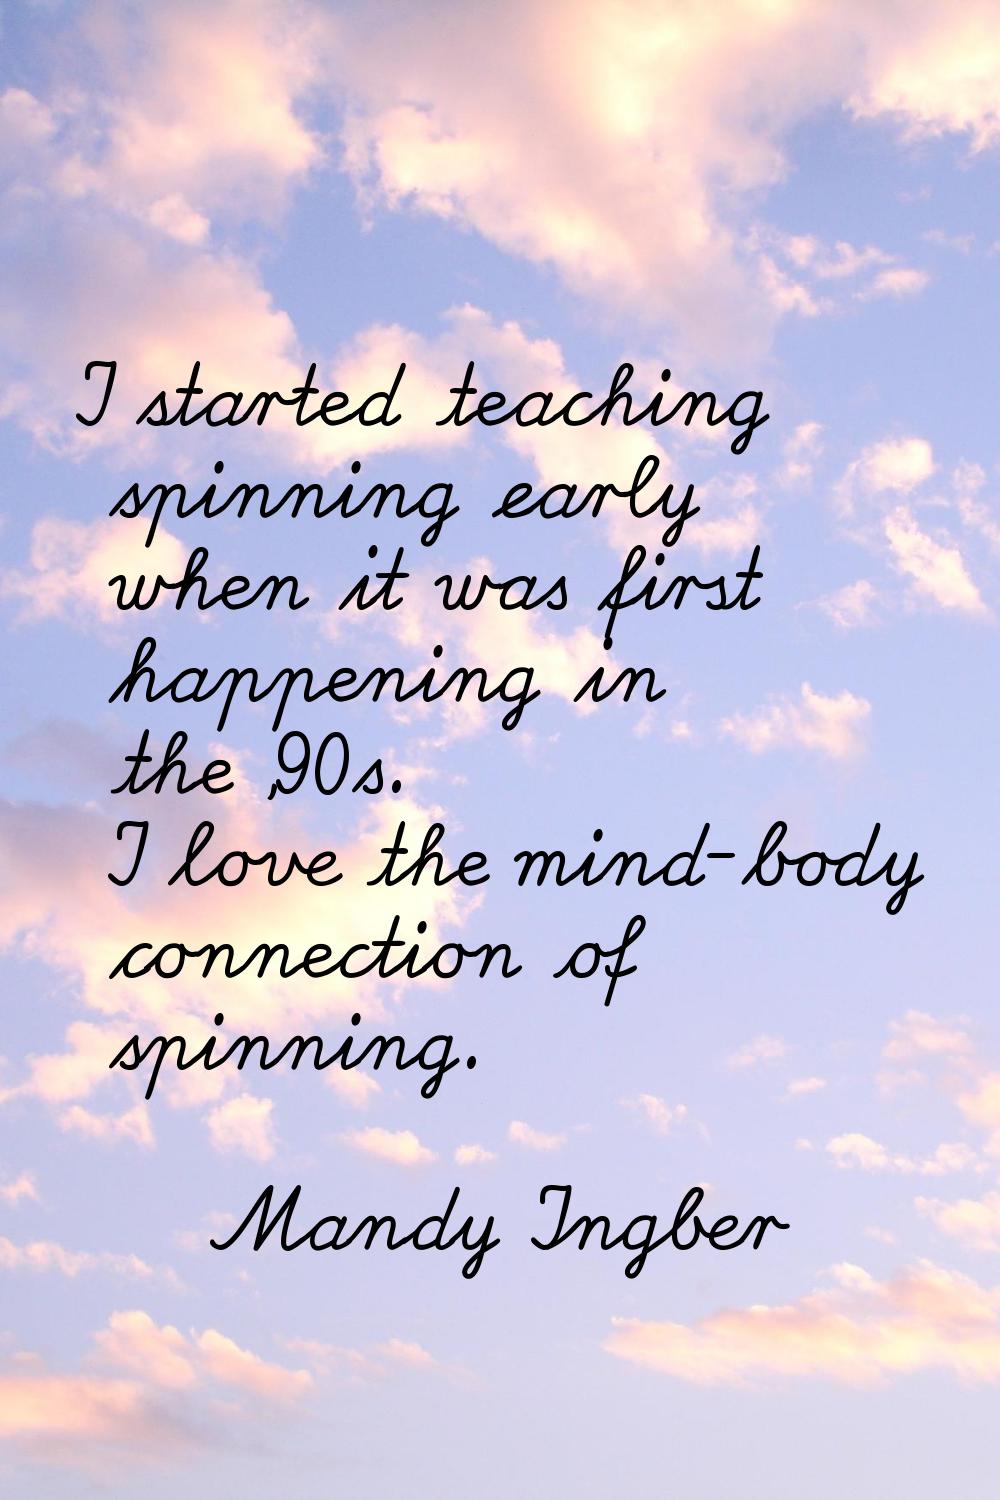 I started teaching spinning early when it was first happening in the '90s. I love the mind-body con